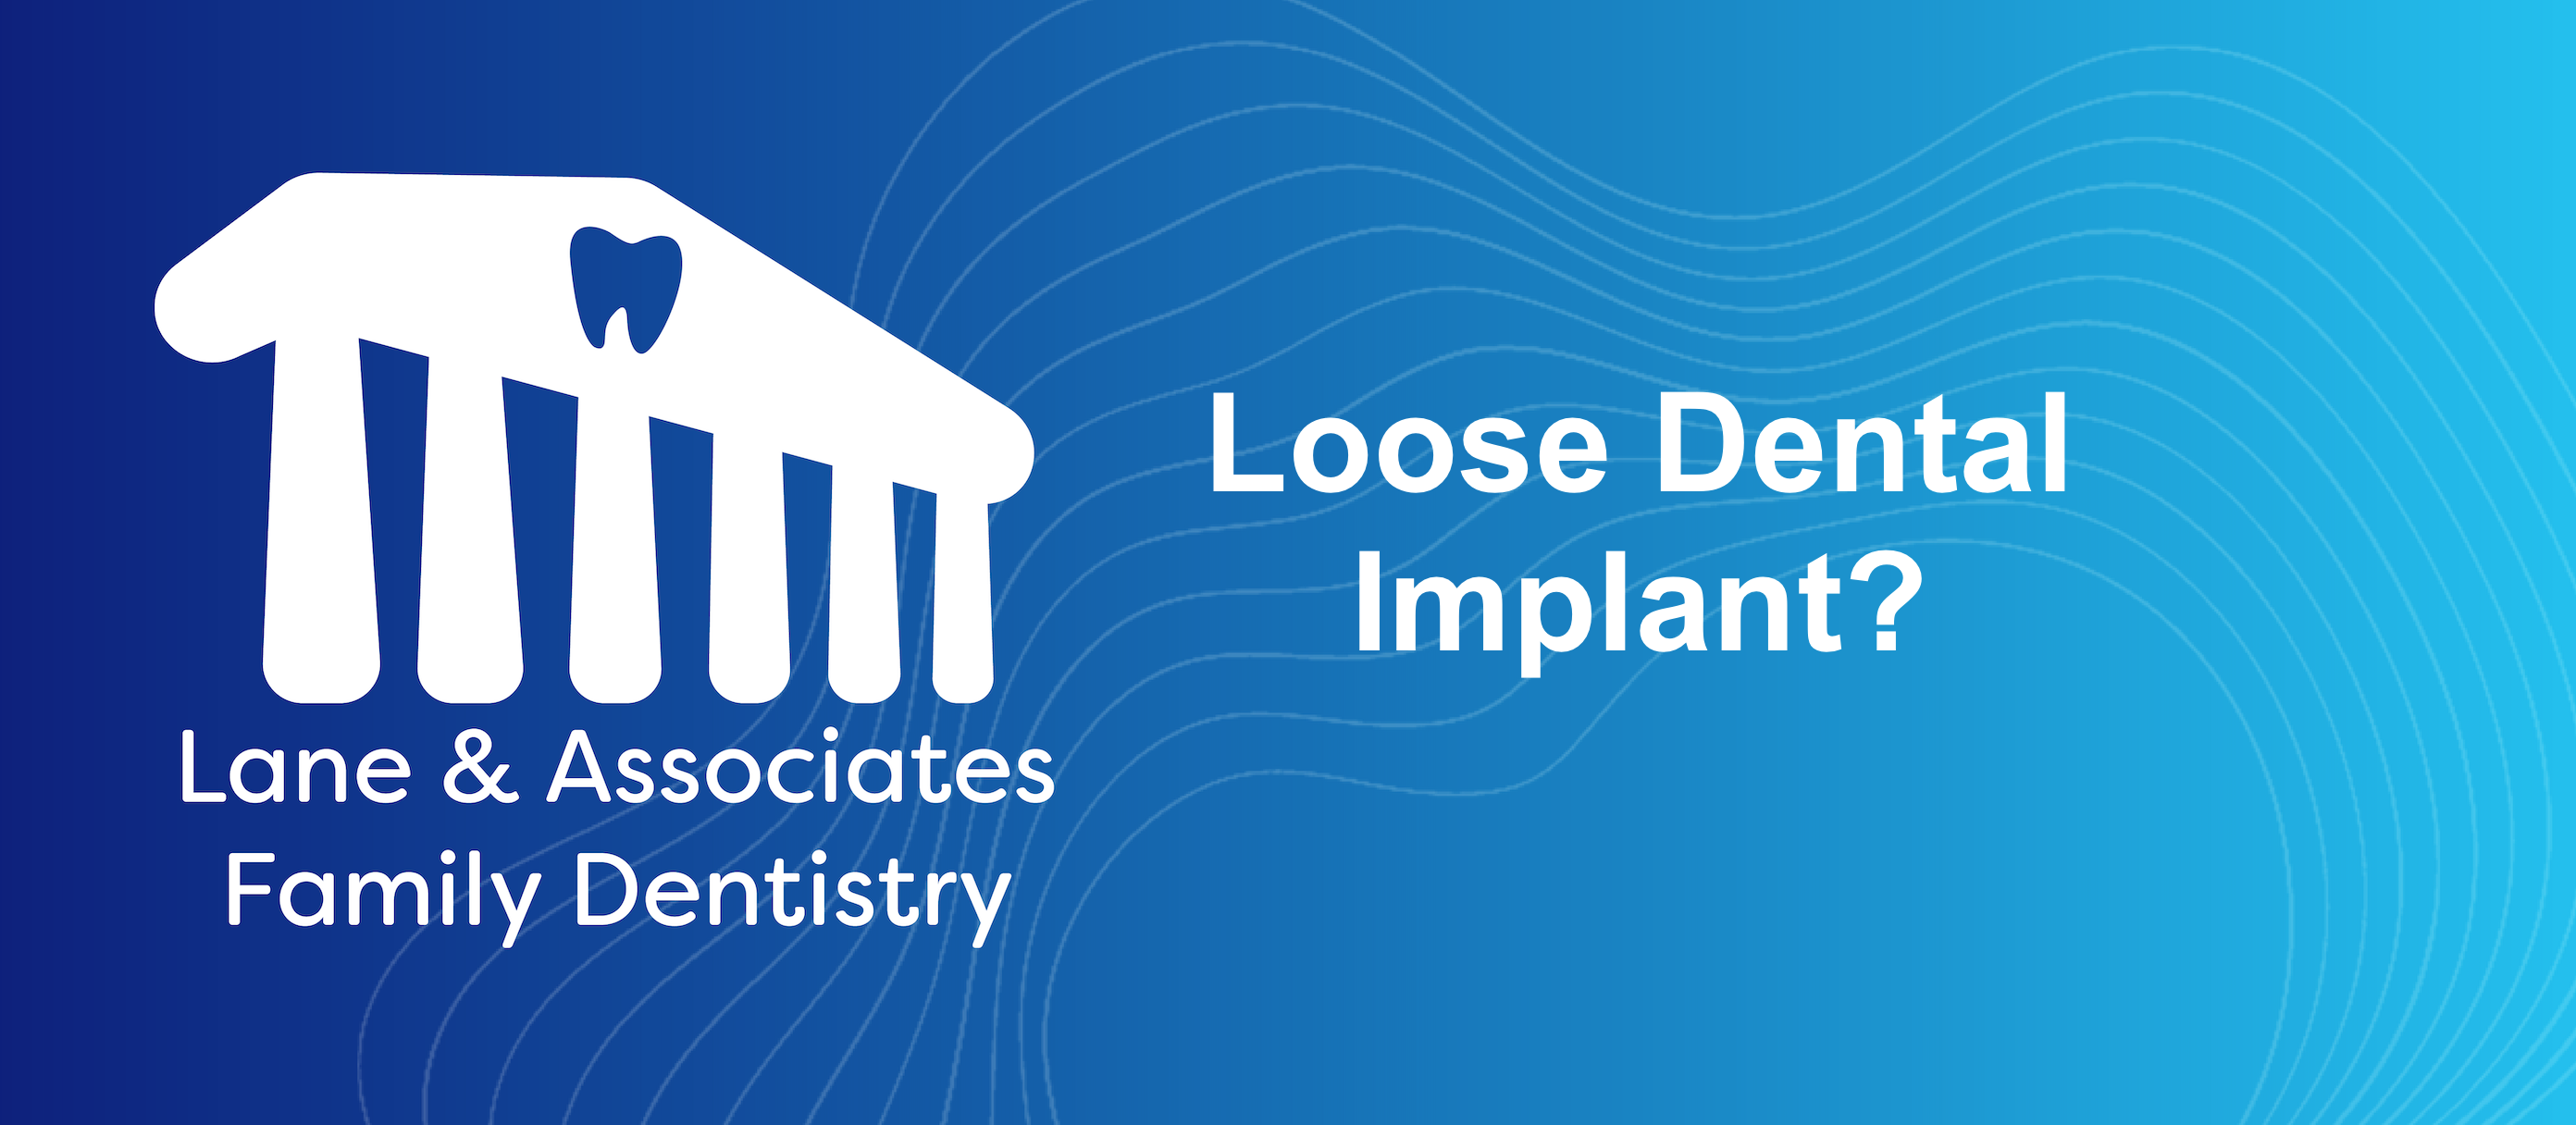 Can a dental implant become loose?